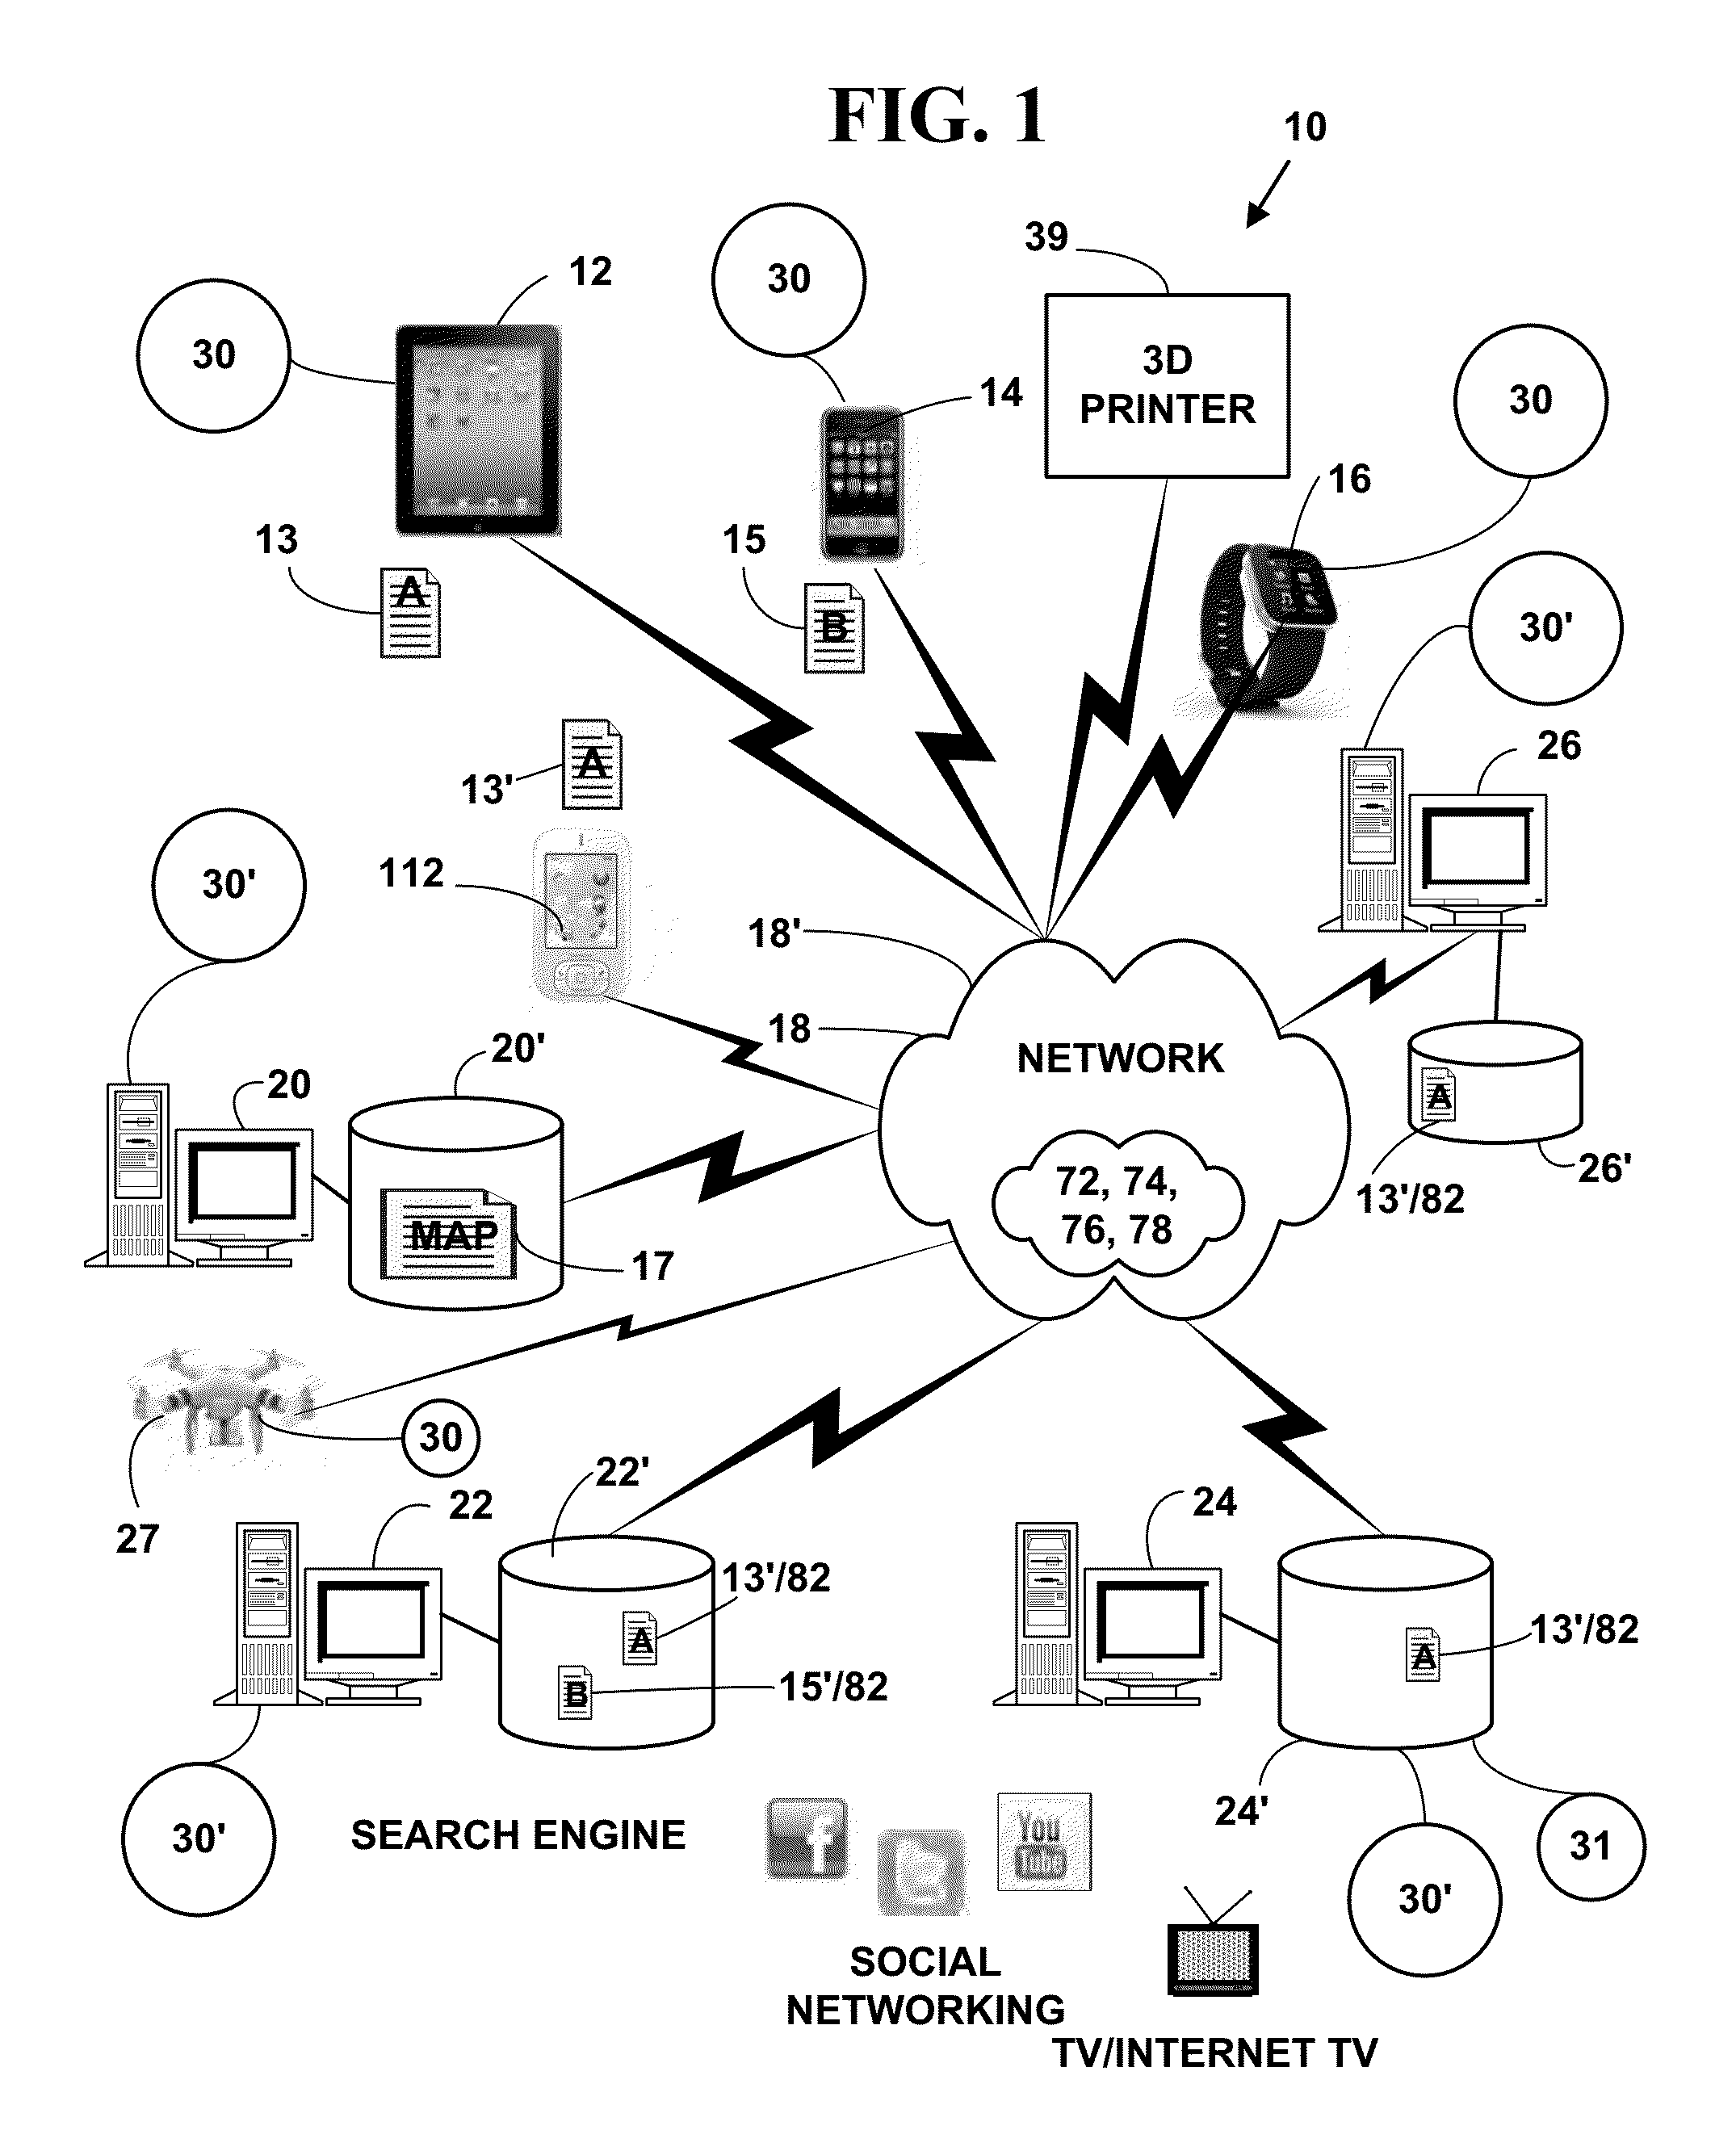 Method and system for a personal network